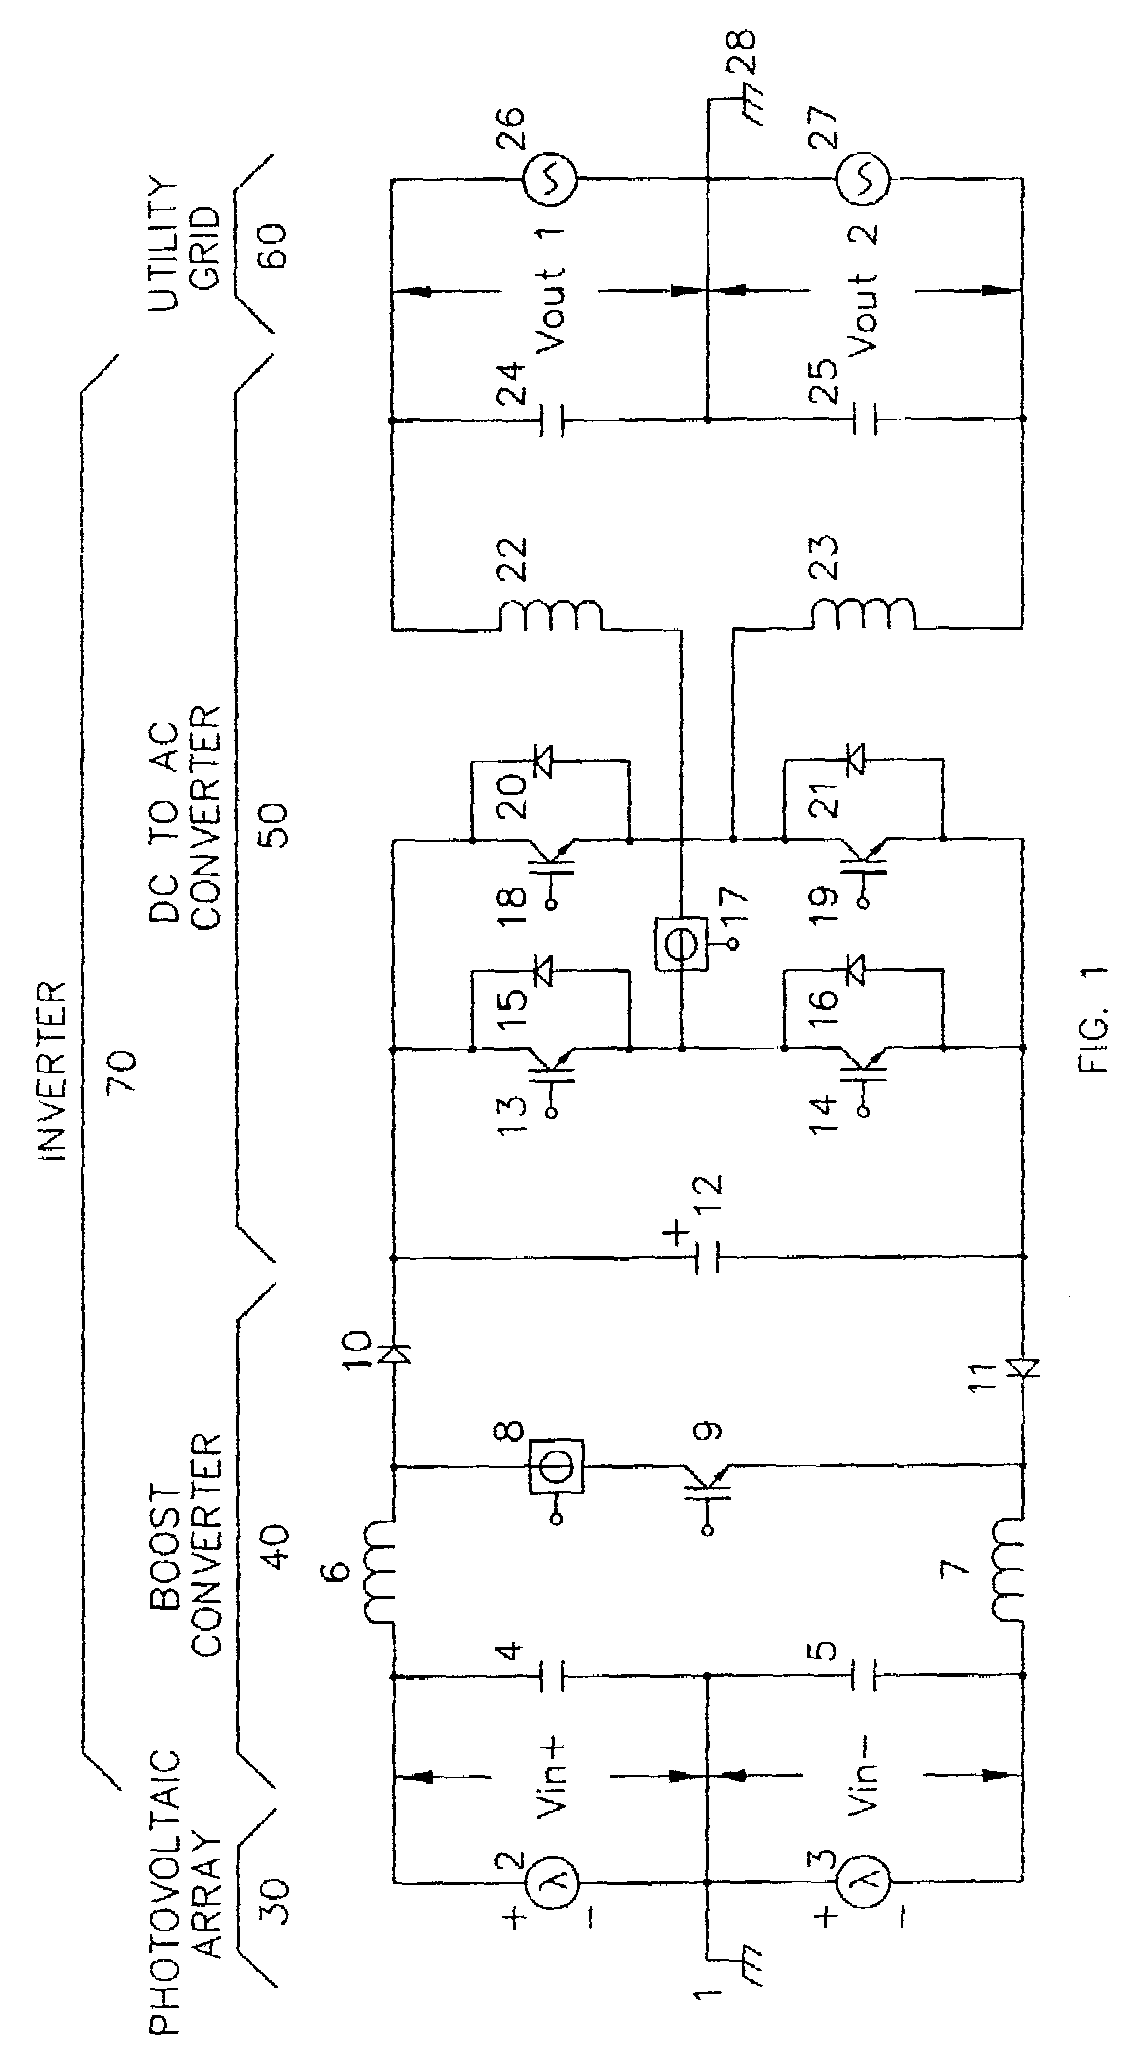 DC to AC inverter with single-switch bipolar boost circuit